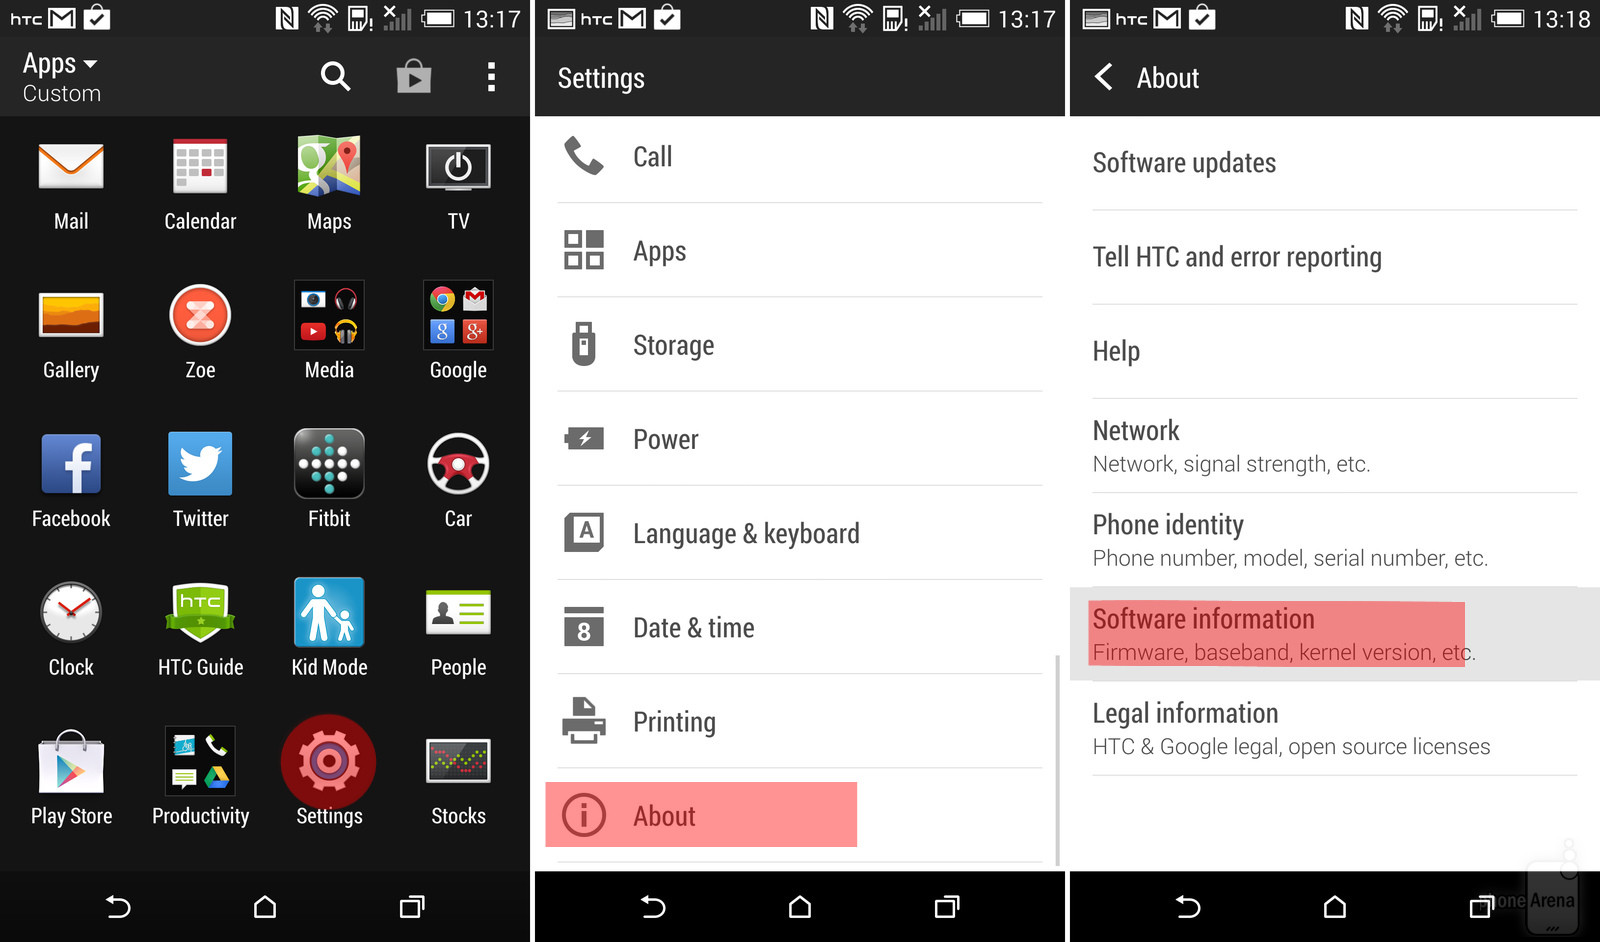 Enable Android developer options